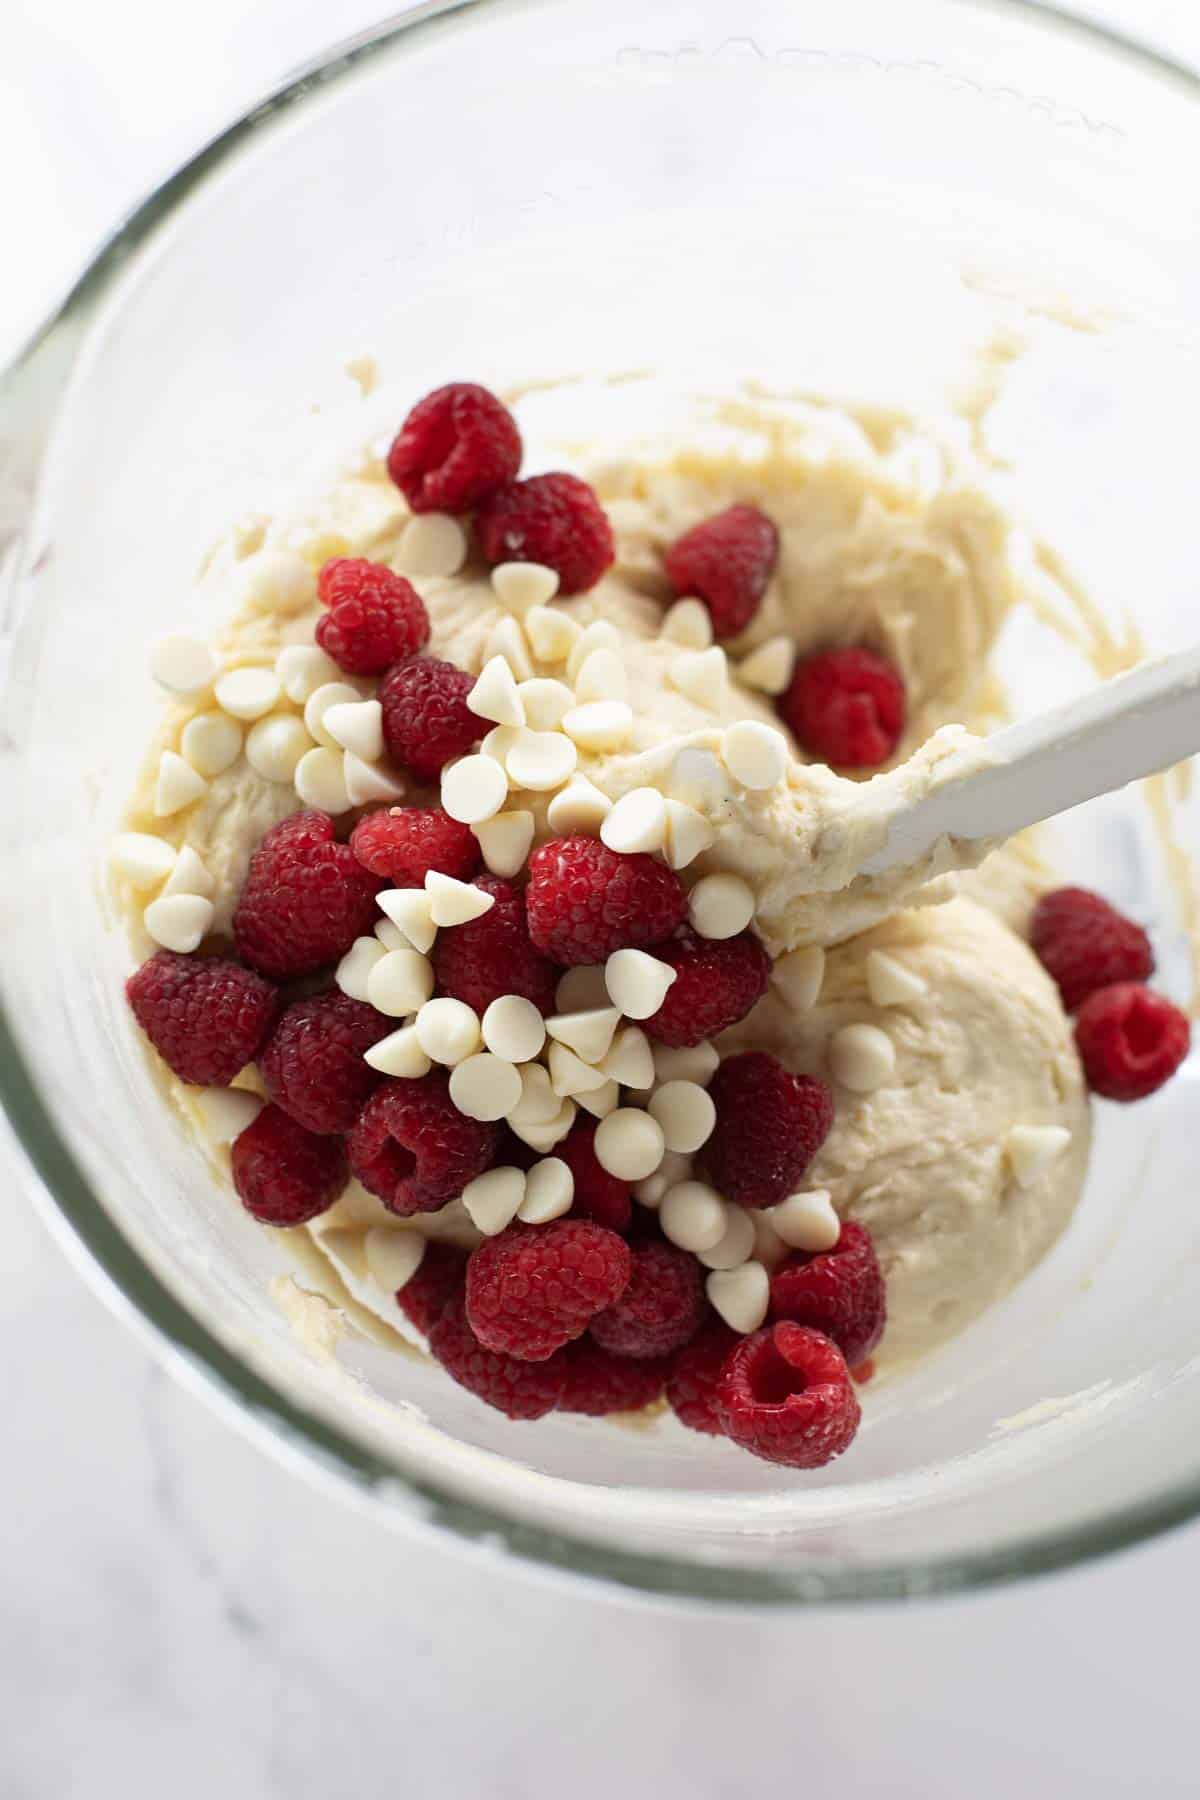 raspberry and white chocolate mixing into batter